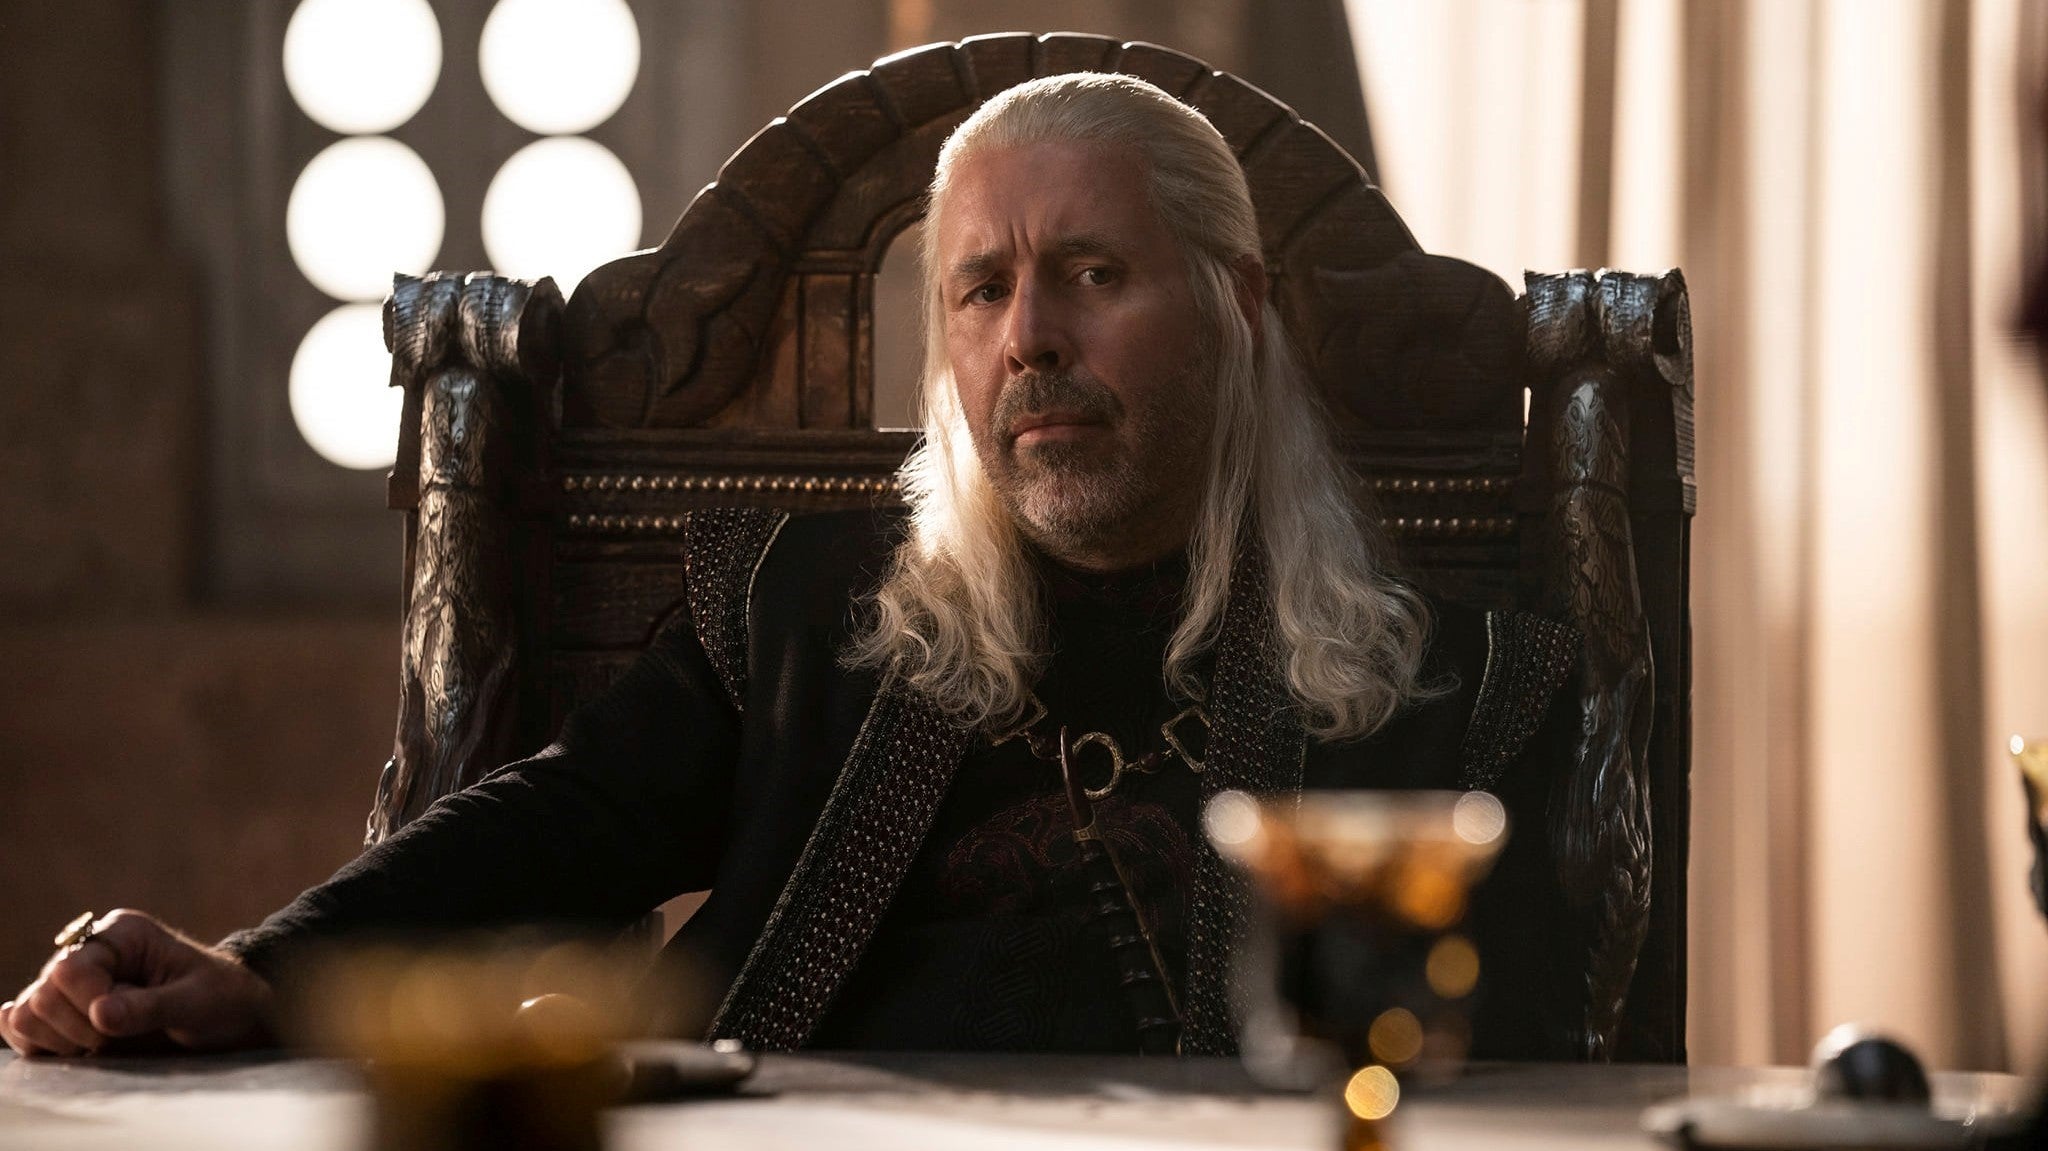 Paddy Considine as King Viserys in HBO television series House of the Dragon. He sits in his council chamber chair, hands resting on the table in front of him.